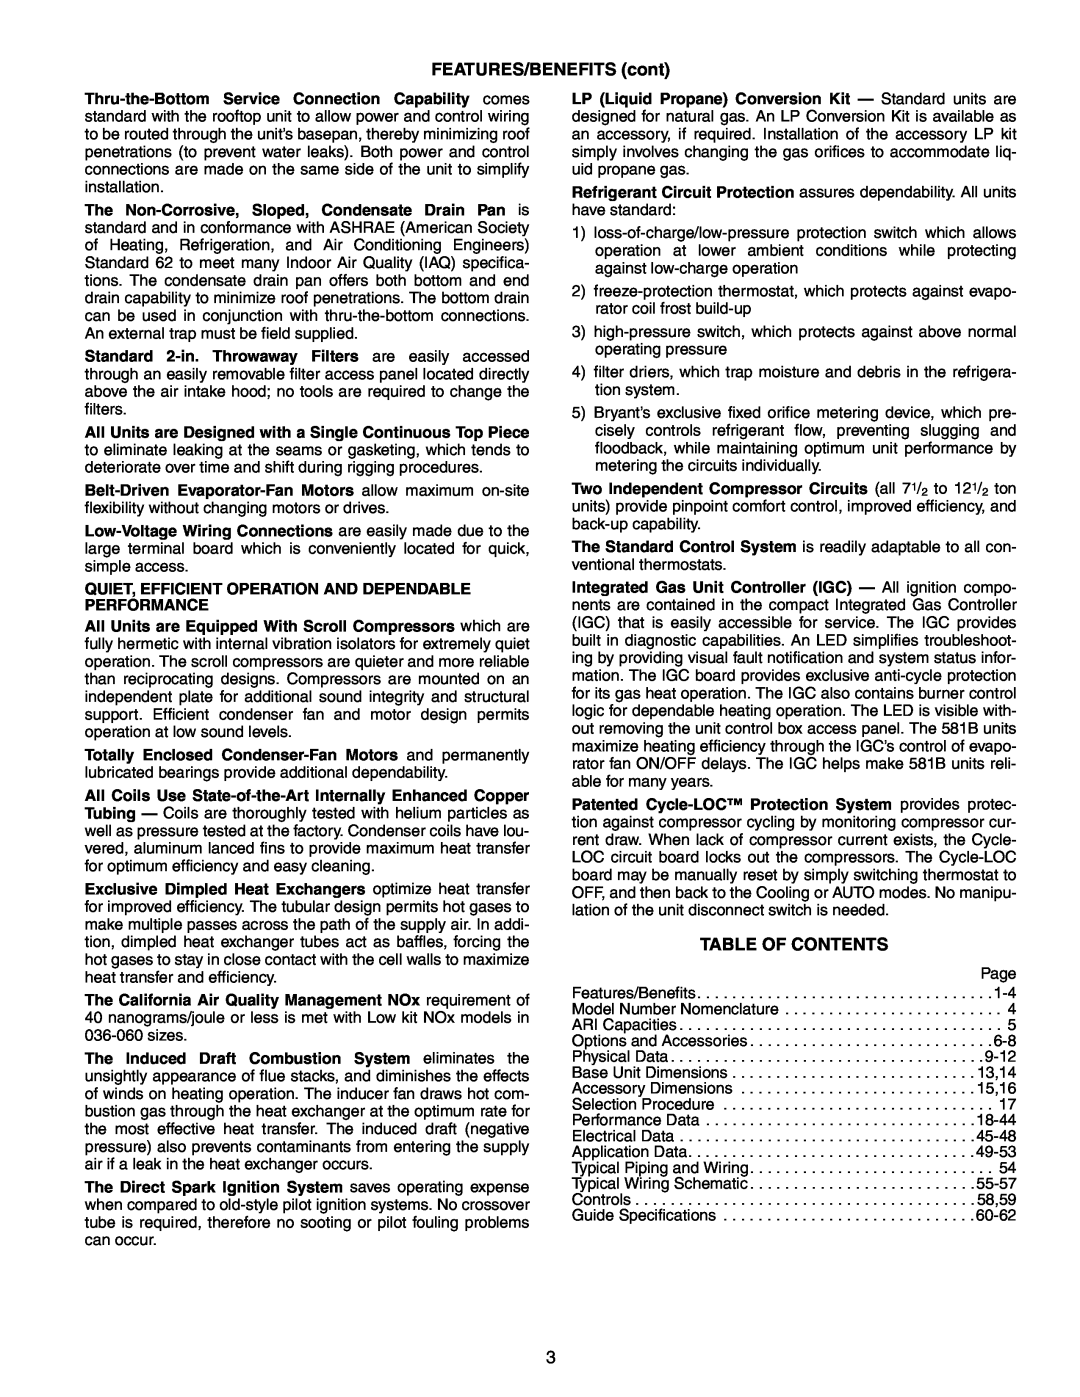 Bryant 581B manual Table Of Contents, FEATURES/BENEFITS cont 